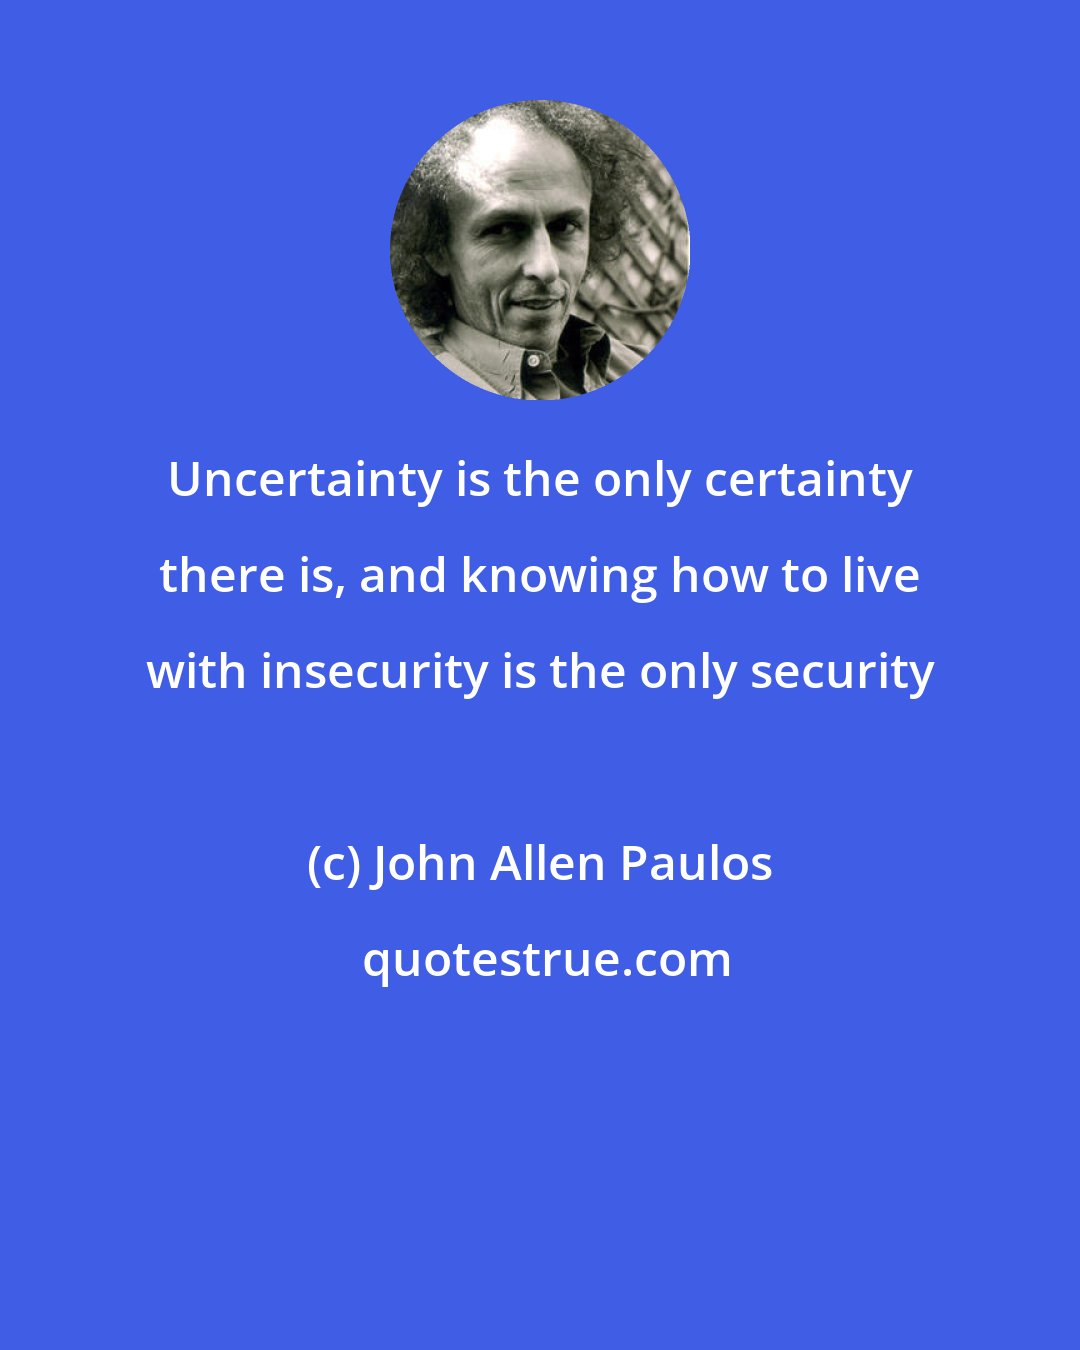 John Allen Paulos: Uncertainty is the only certainty there is, and knowing how to live with insecurity is the only security